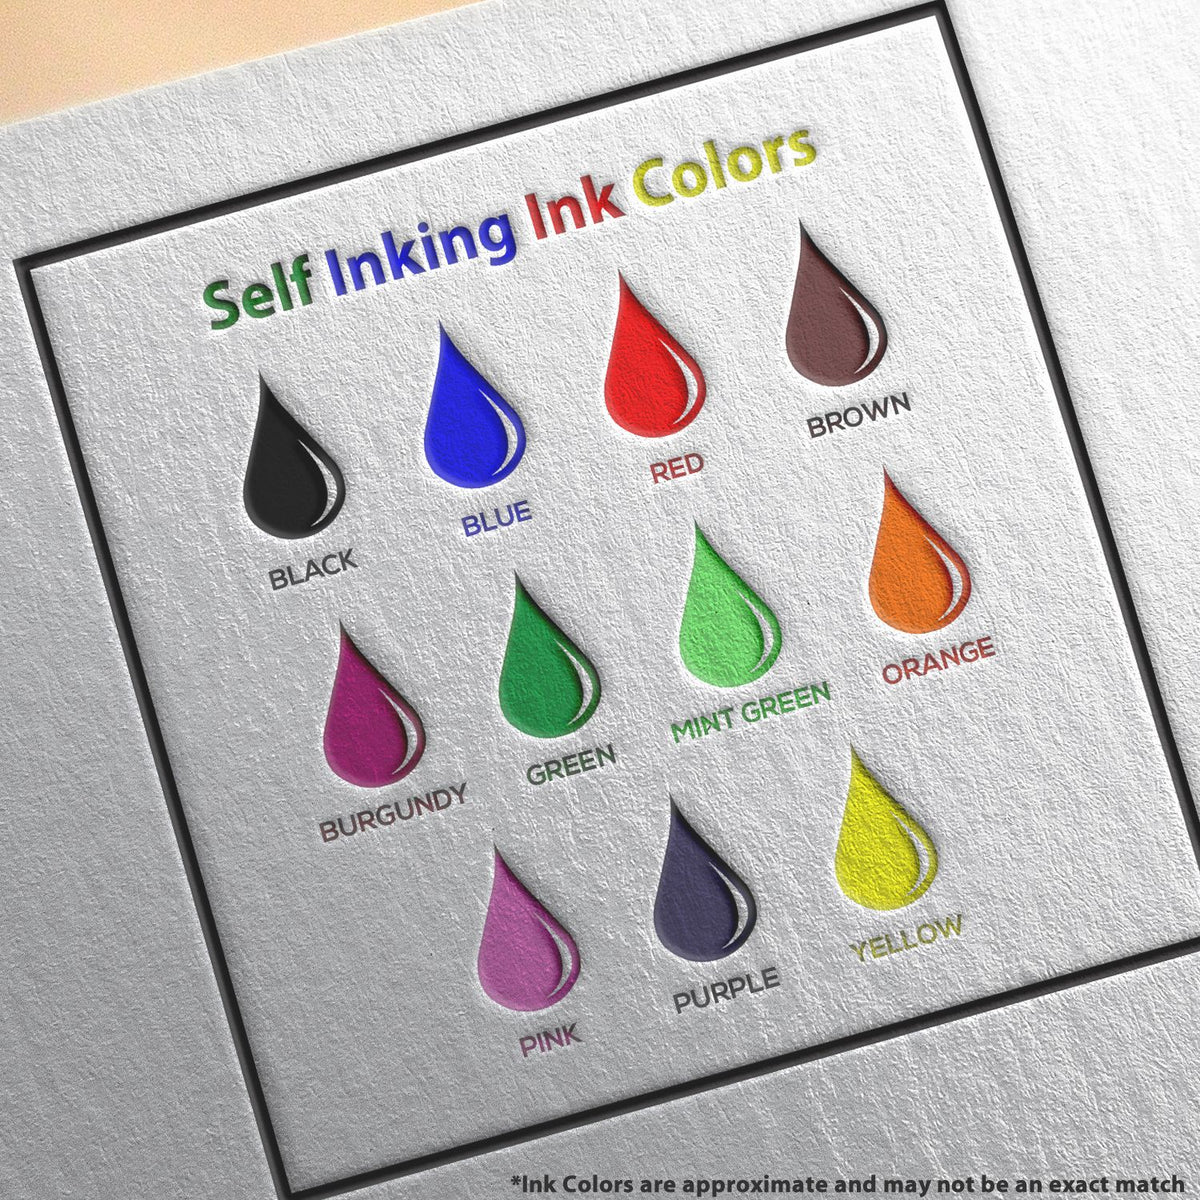 A picture showing the different ink colors or hues available for the Self-Inking Rectangular Colorado Notary Stamp product.